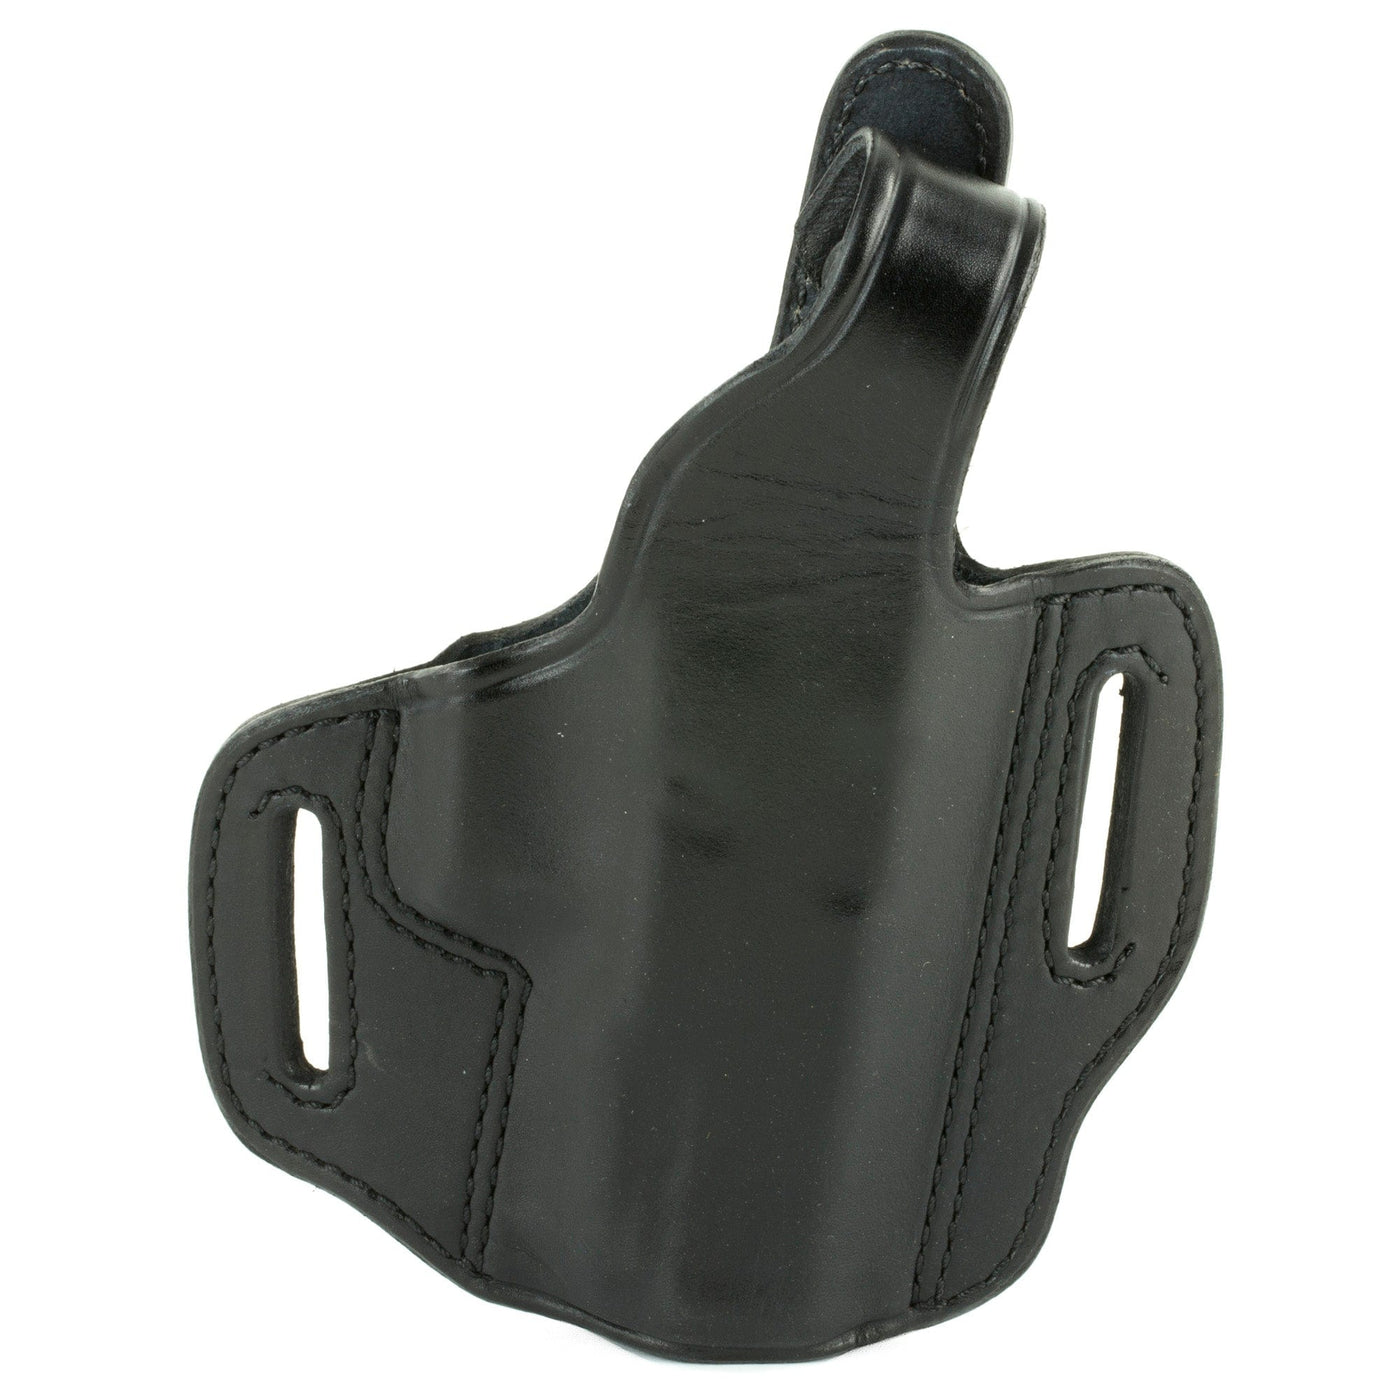 Don Hume D Hume H721-p Sig P365 Blk Rh Holsters